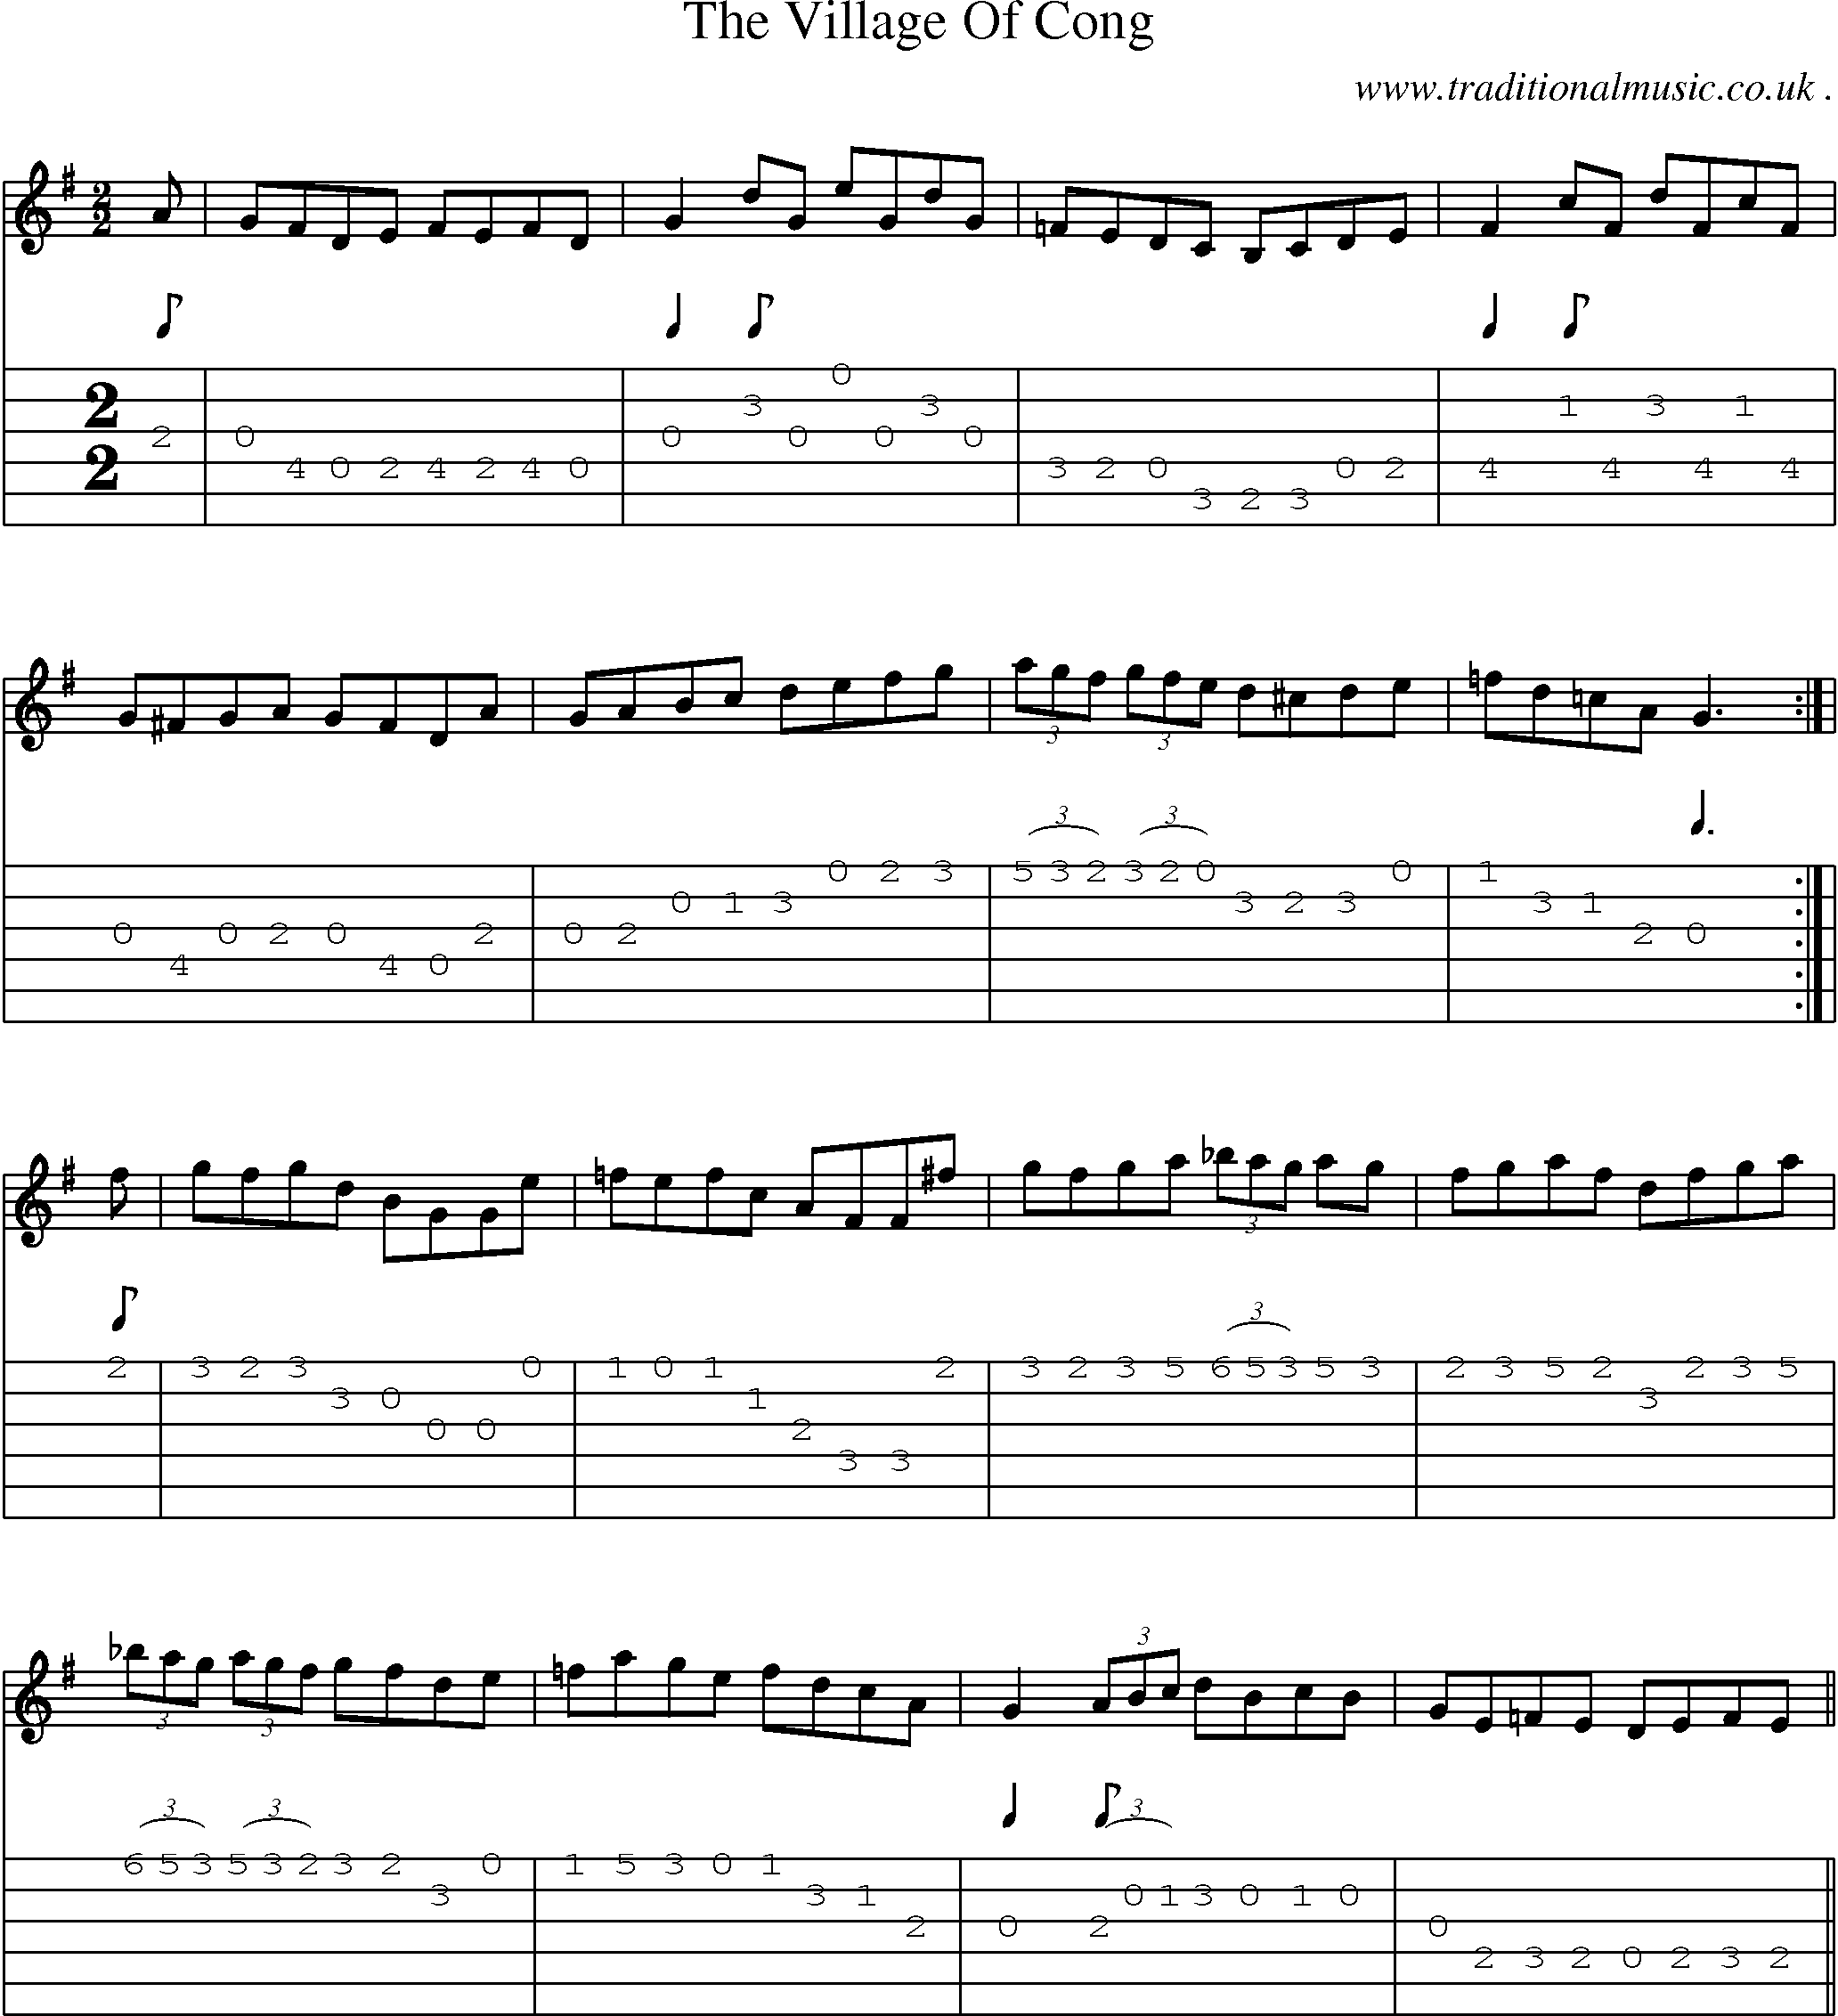 Sheet-Music and Guitar Tabs for The Village Of Cong